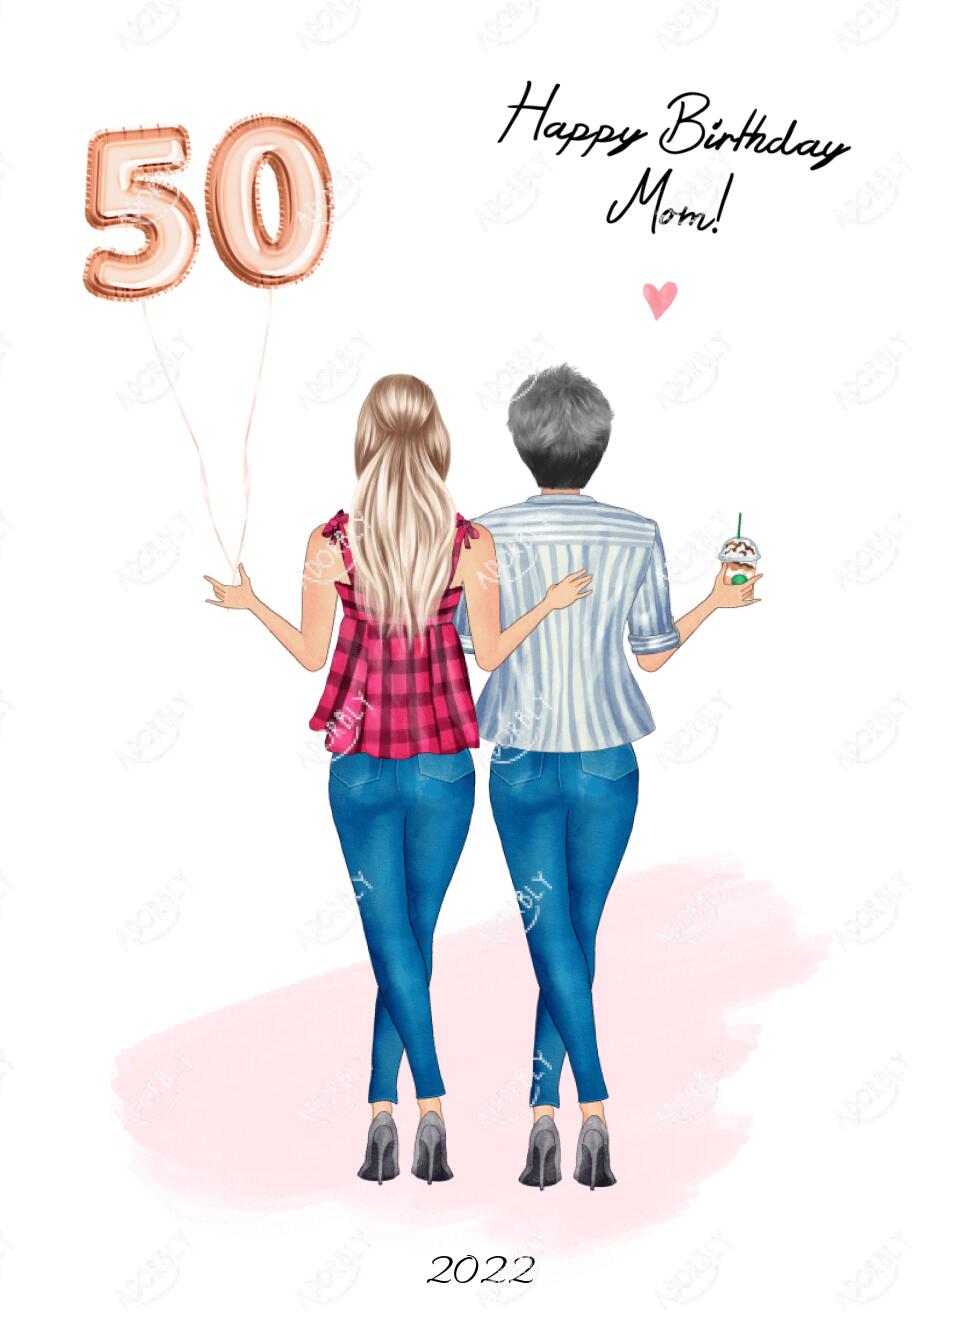 Happy Birthday Mom in Jeans with Balloons - Personalized Birthday Card